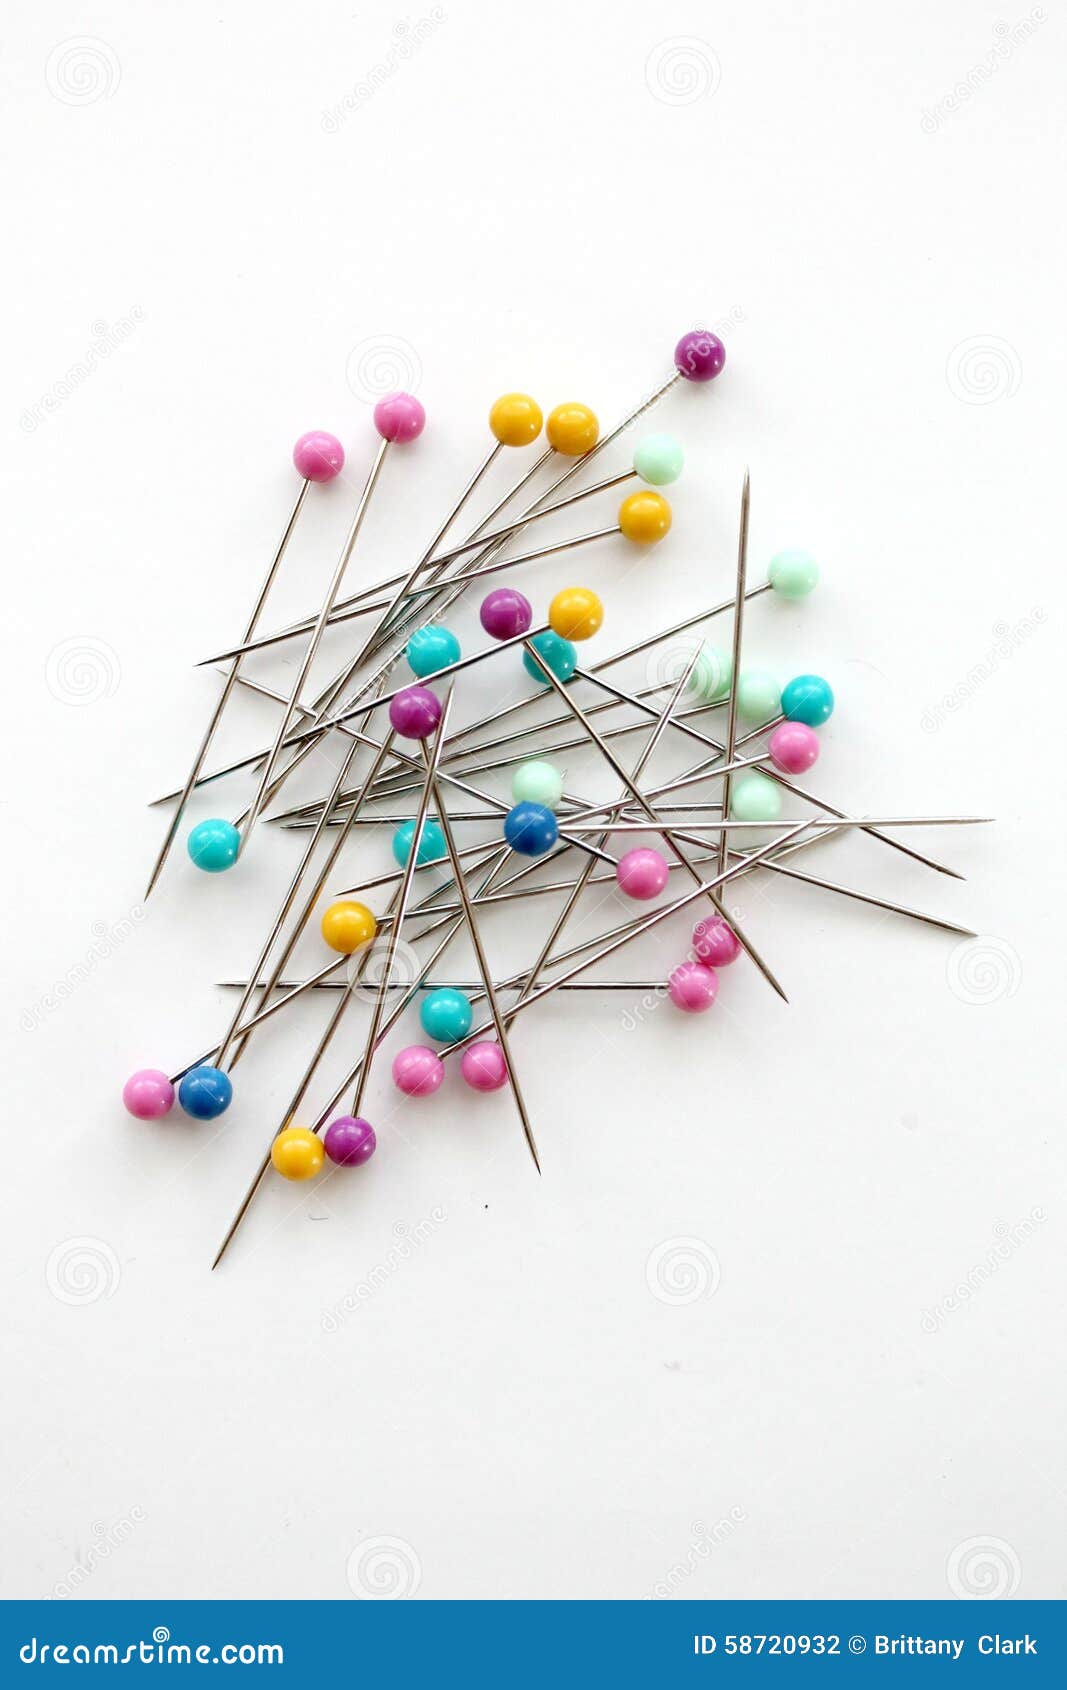 Sewing Pins On Pink Background Stock Photo - Download Image Now